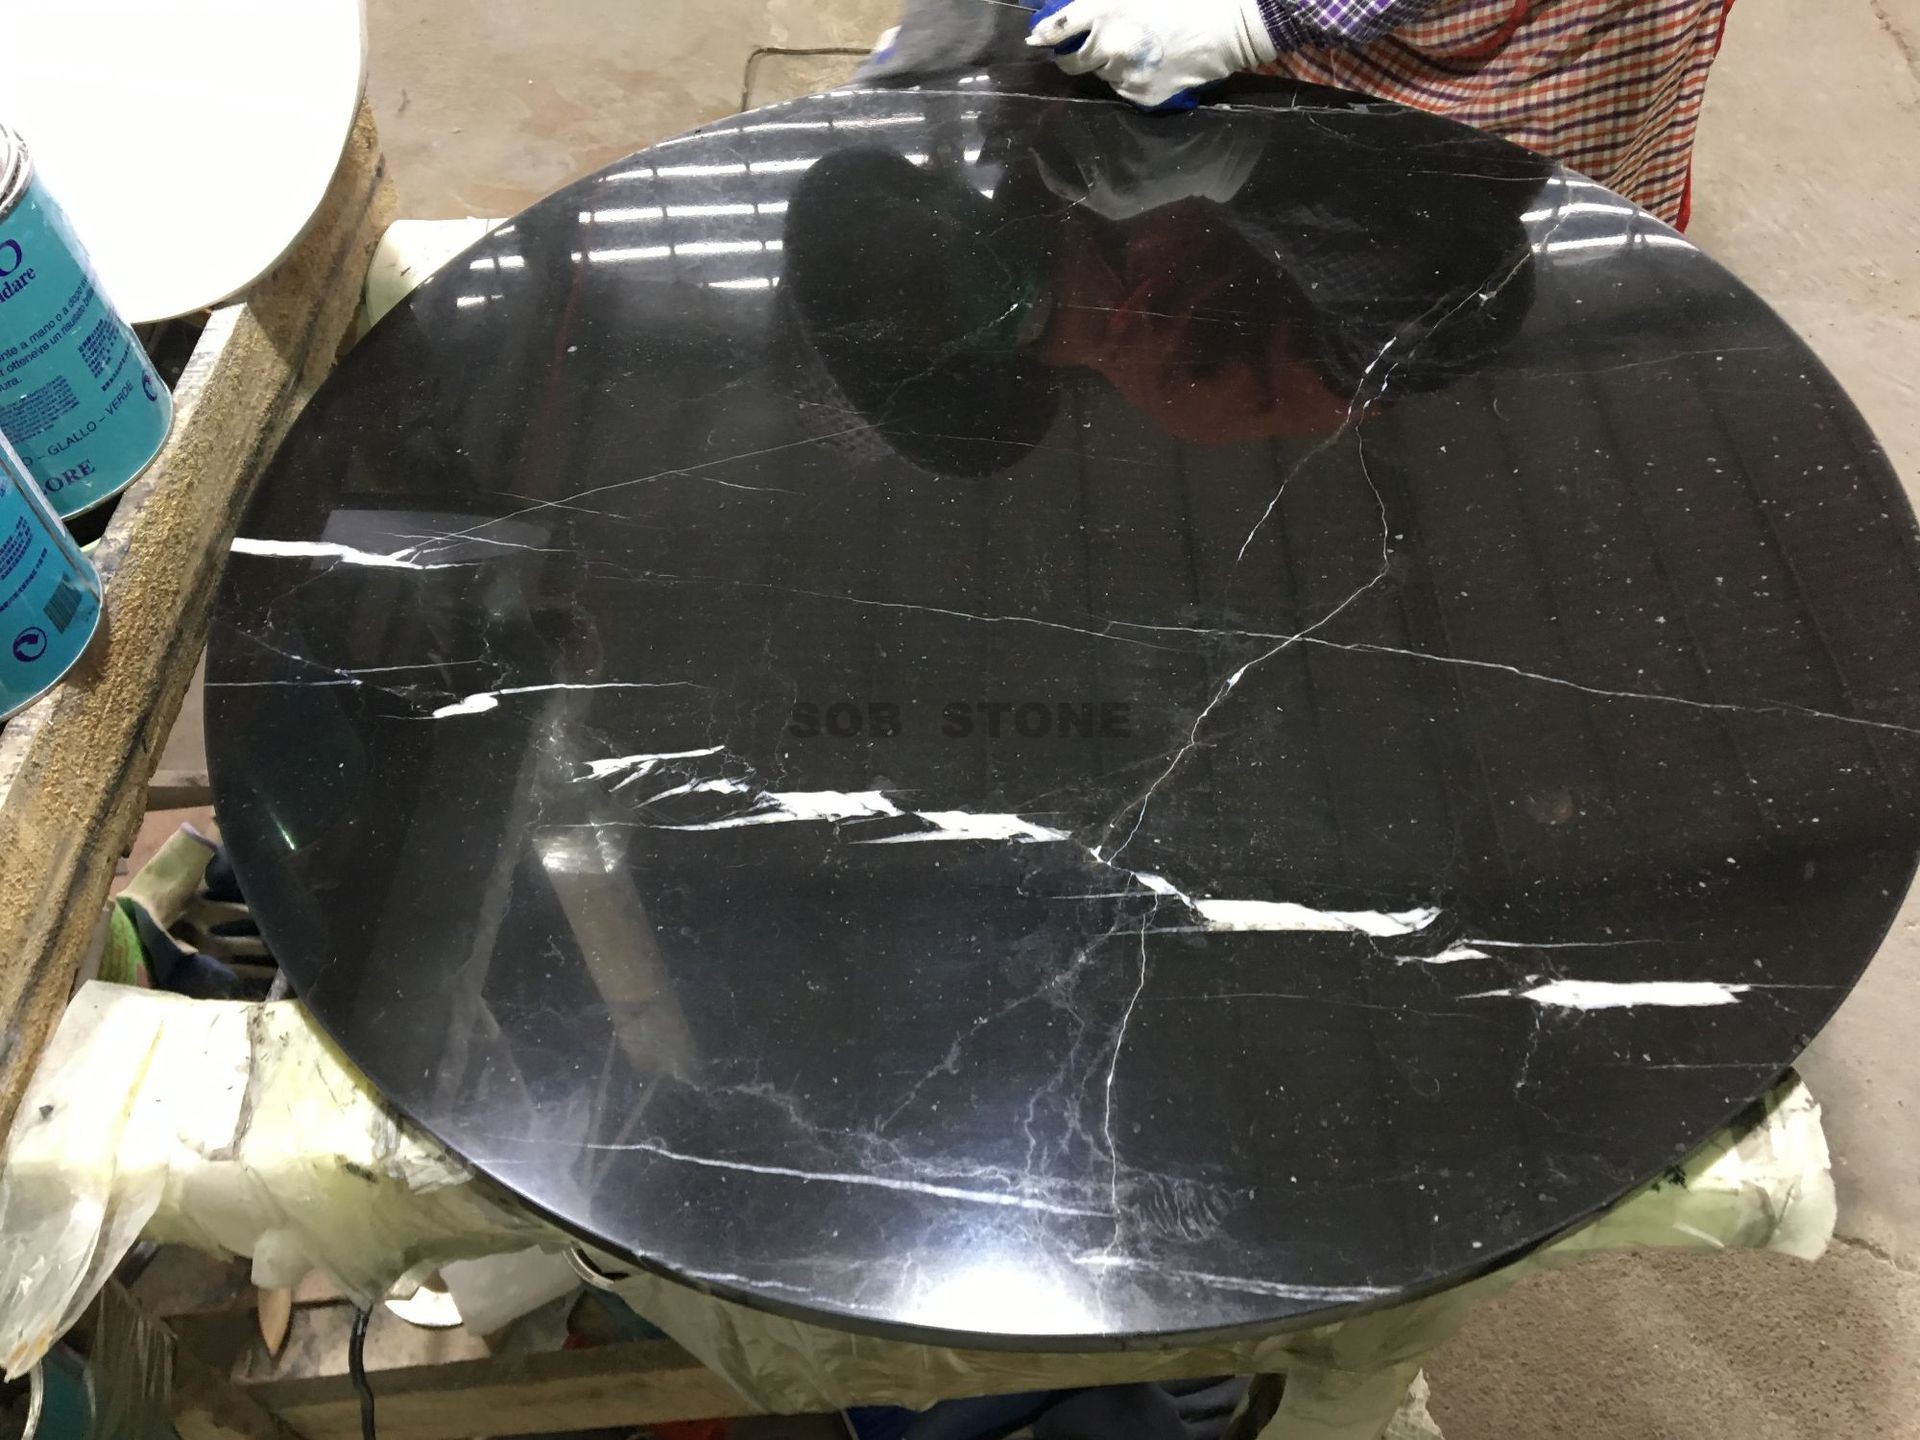 Black Marquina Marble Round Table Tops